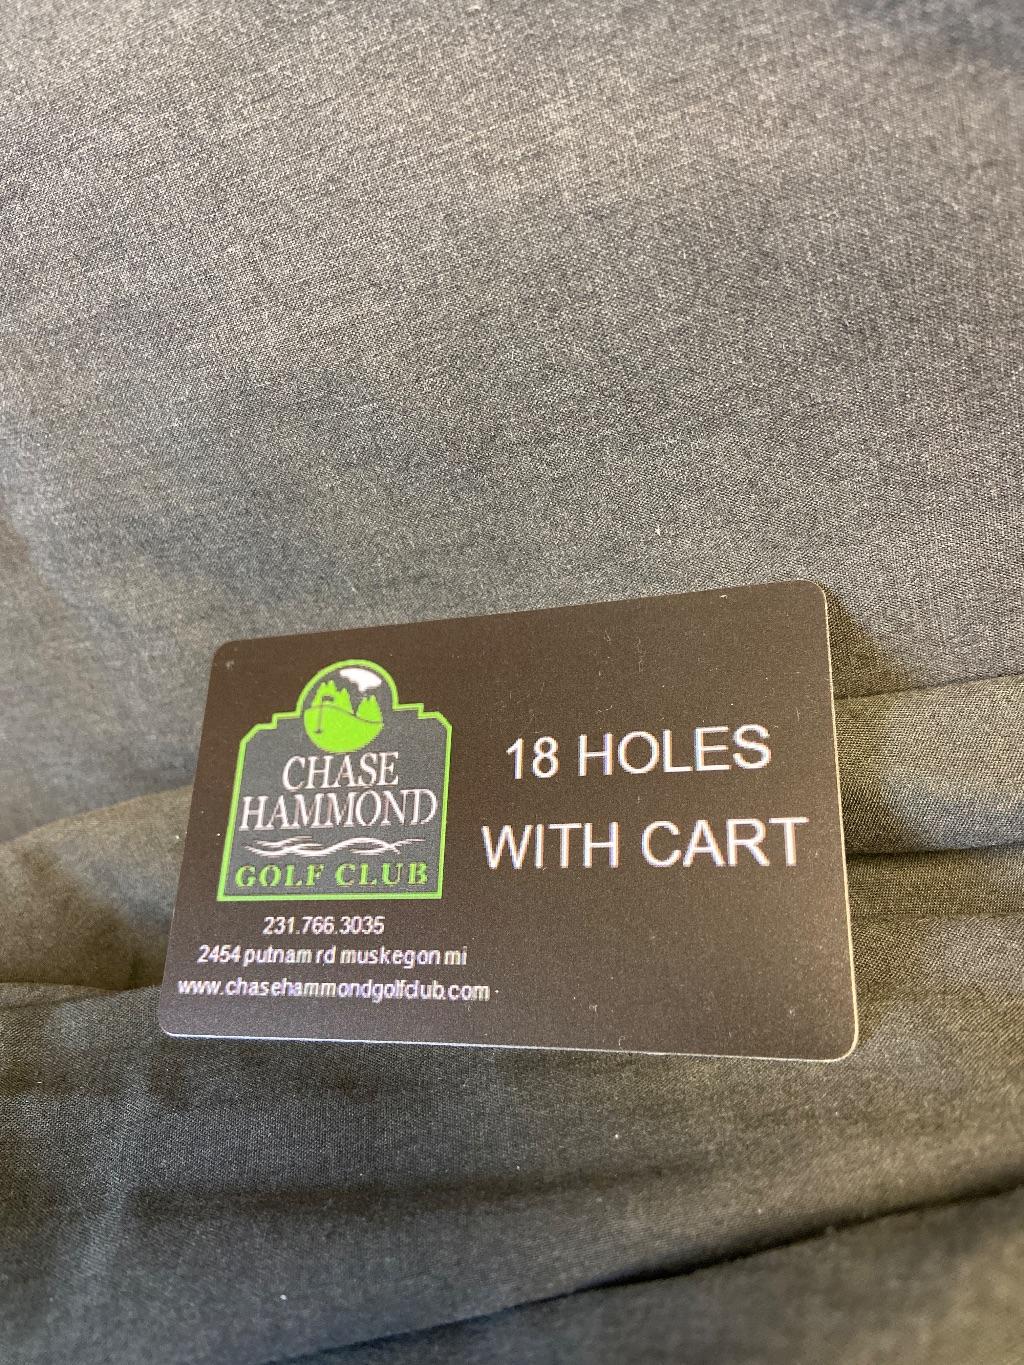 Chase Hammond Golf Club - 4 Rounds of Golf with Cart